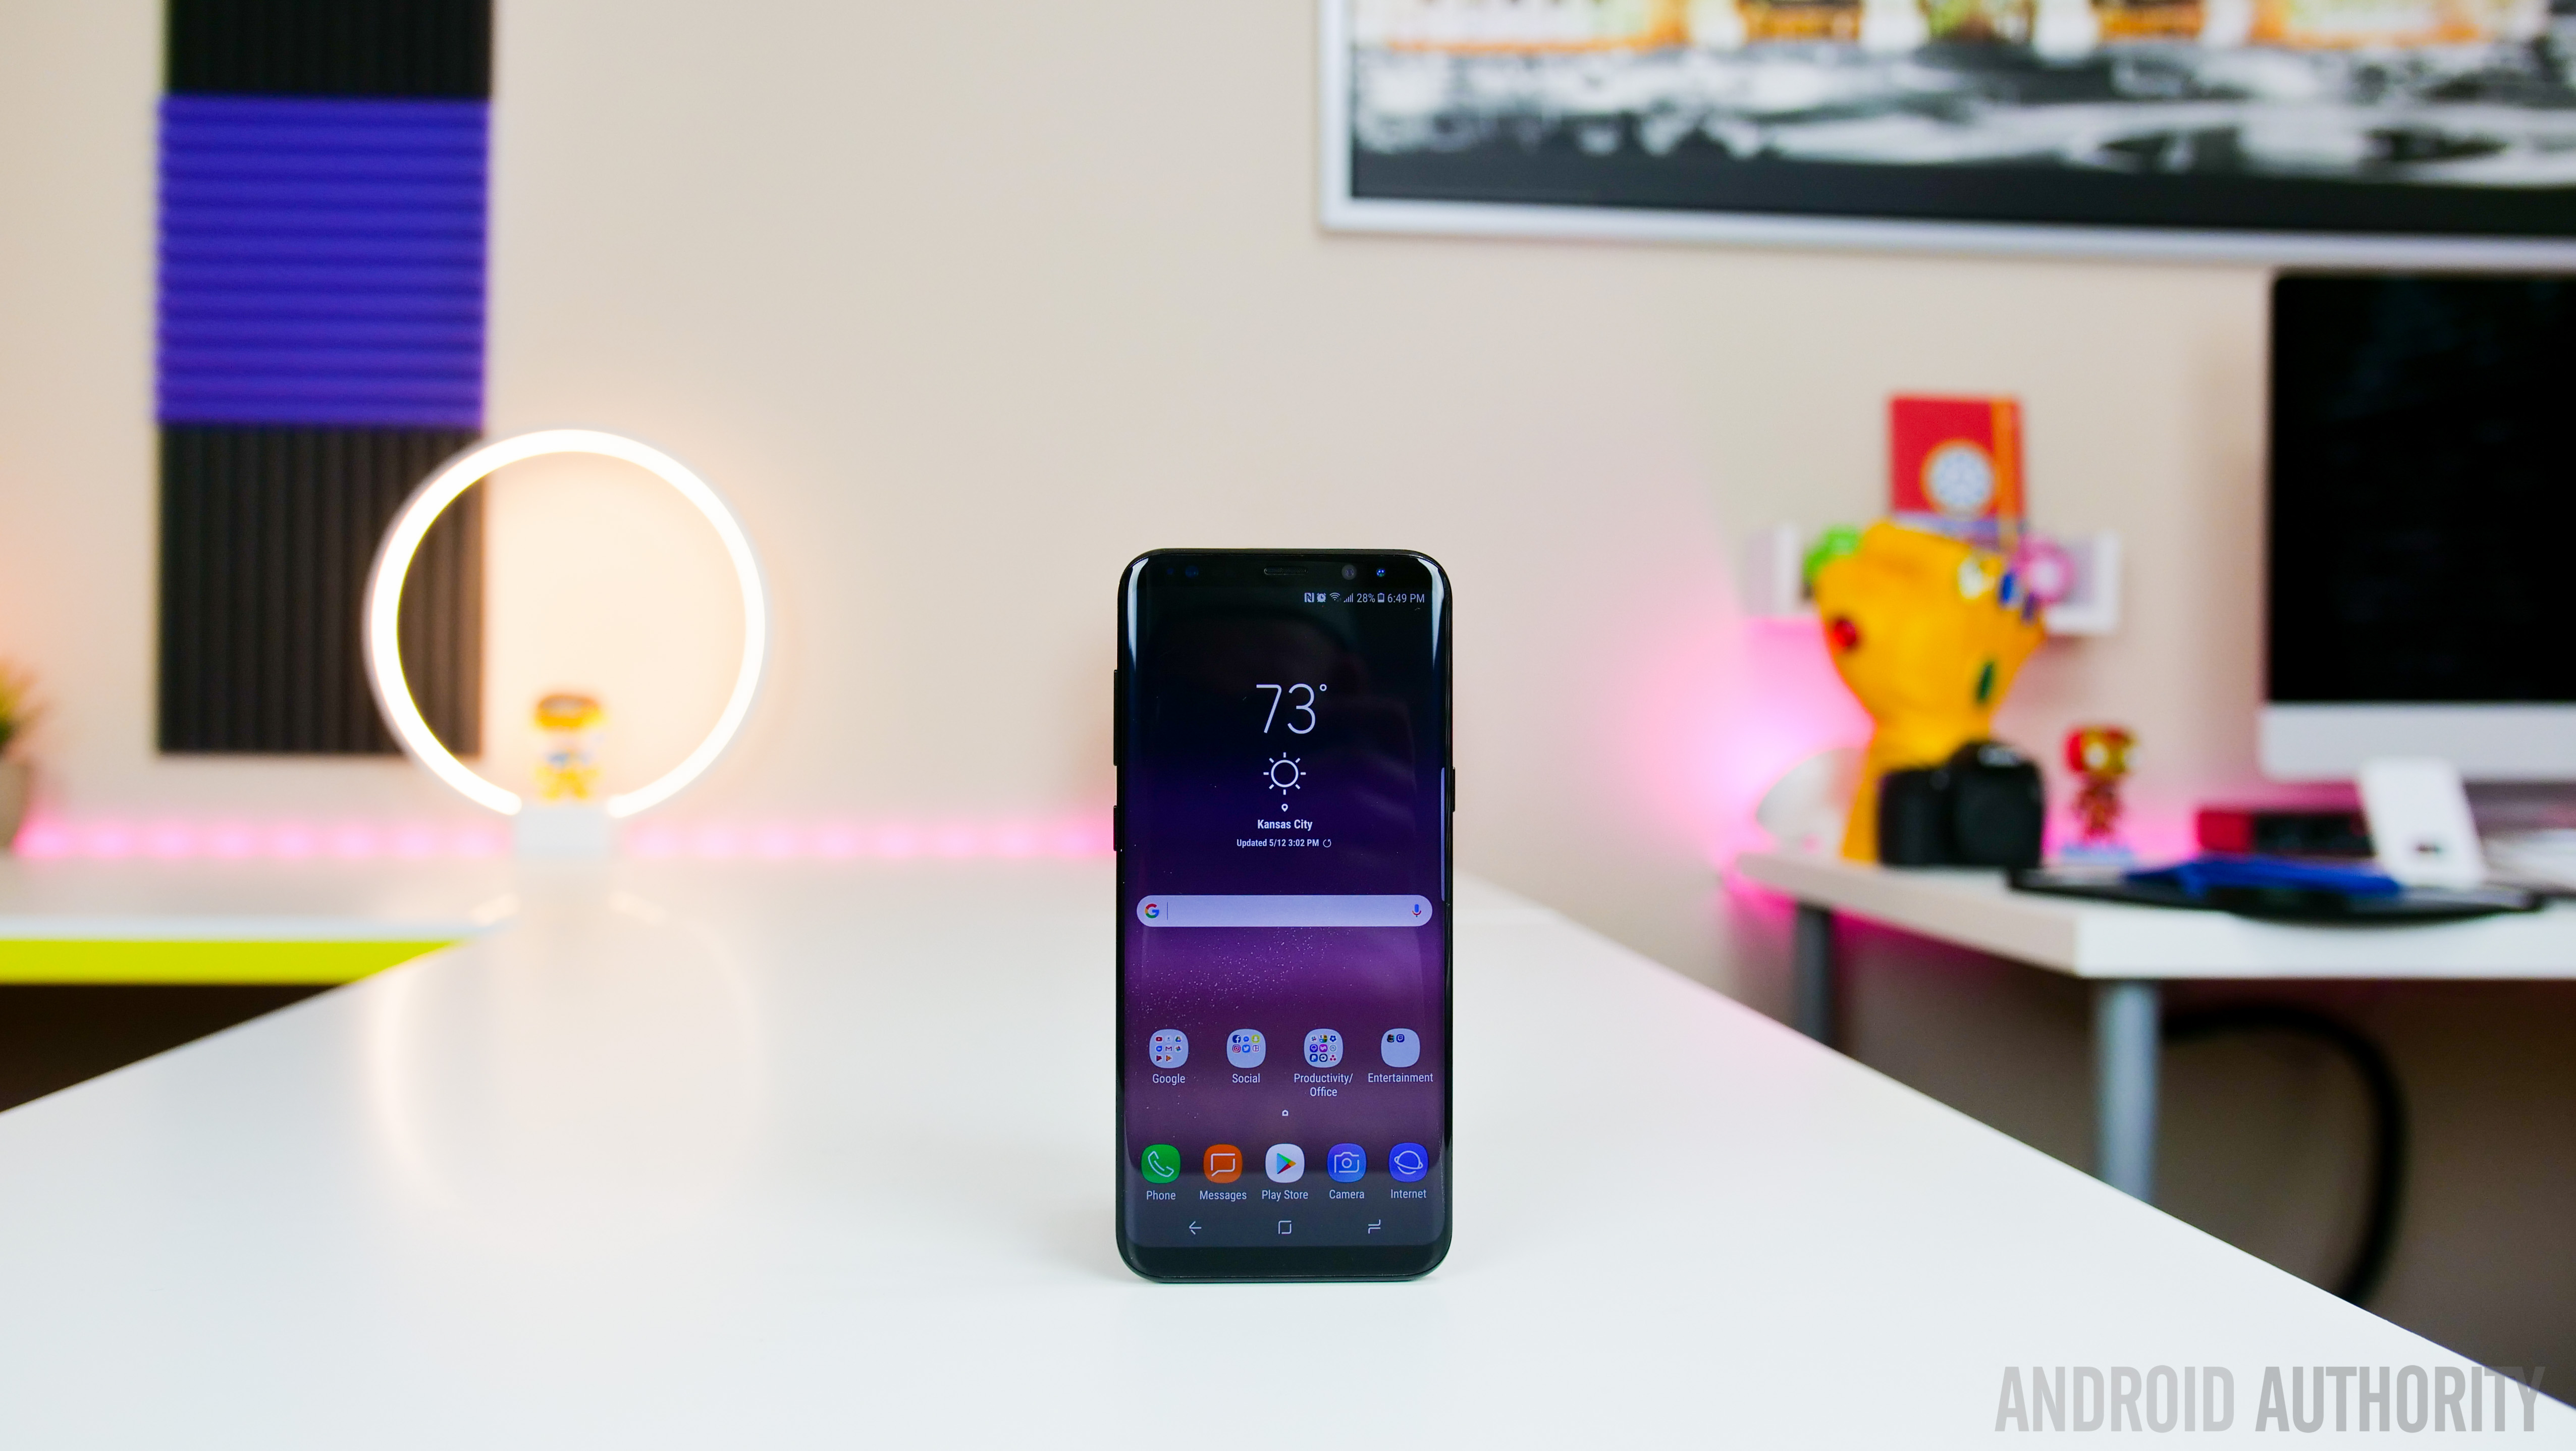 How to force apps into full screen on the Samsung Galaxy S8